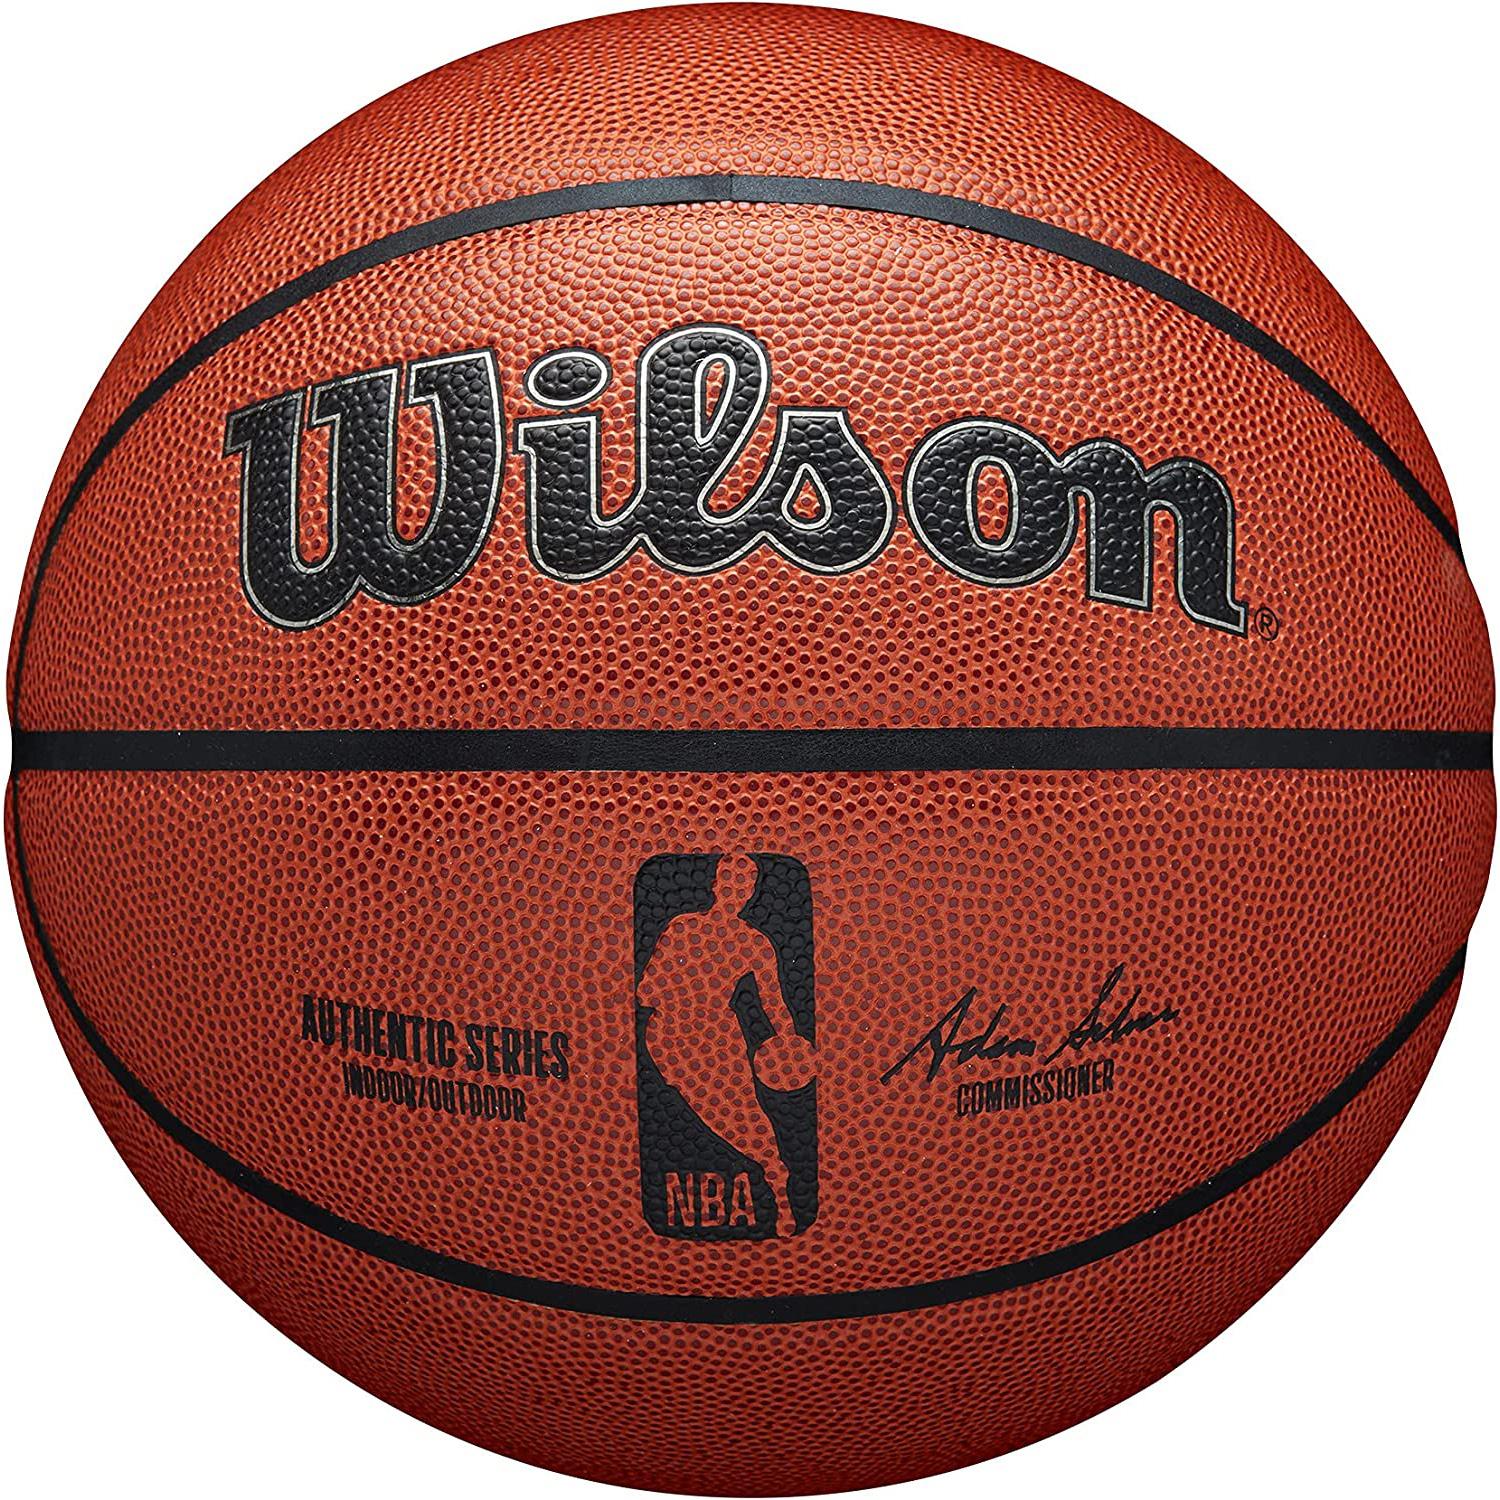 Wilson NBA Authentic Series Basketball for $28.45 Shipped